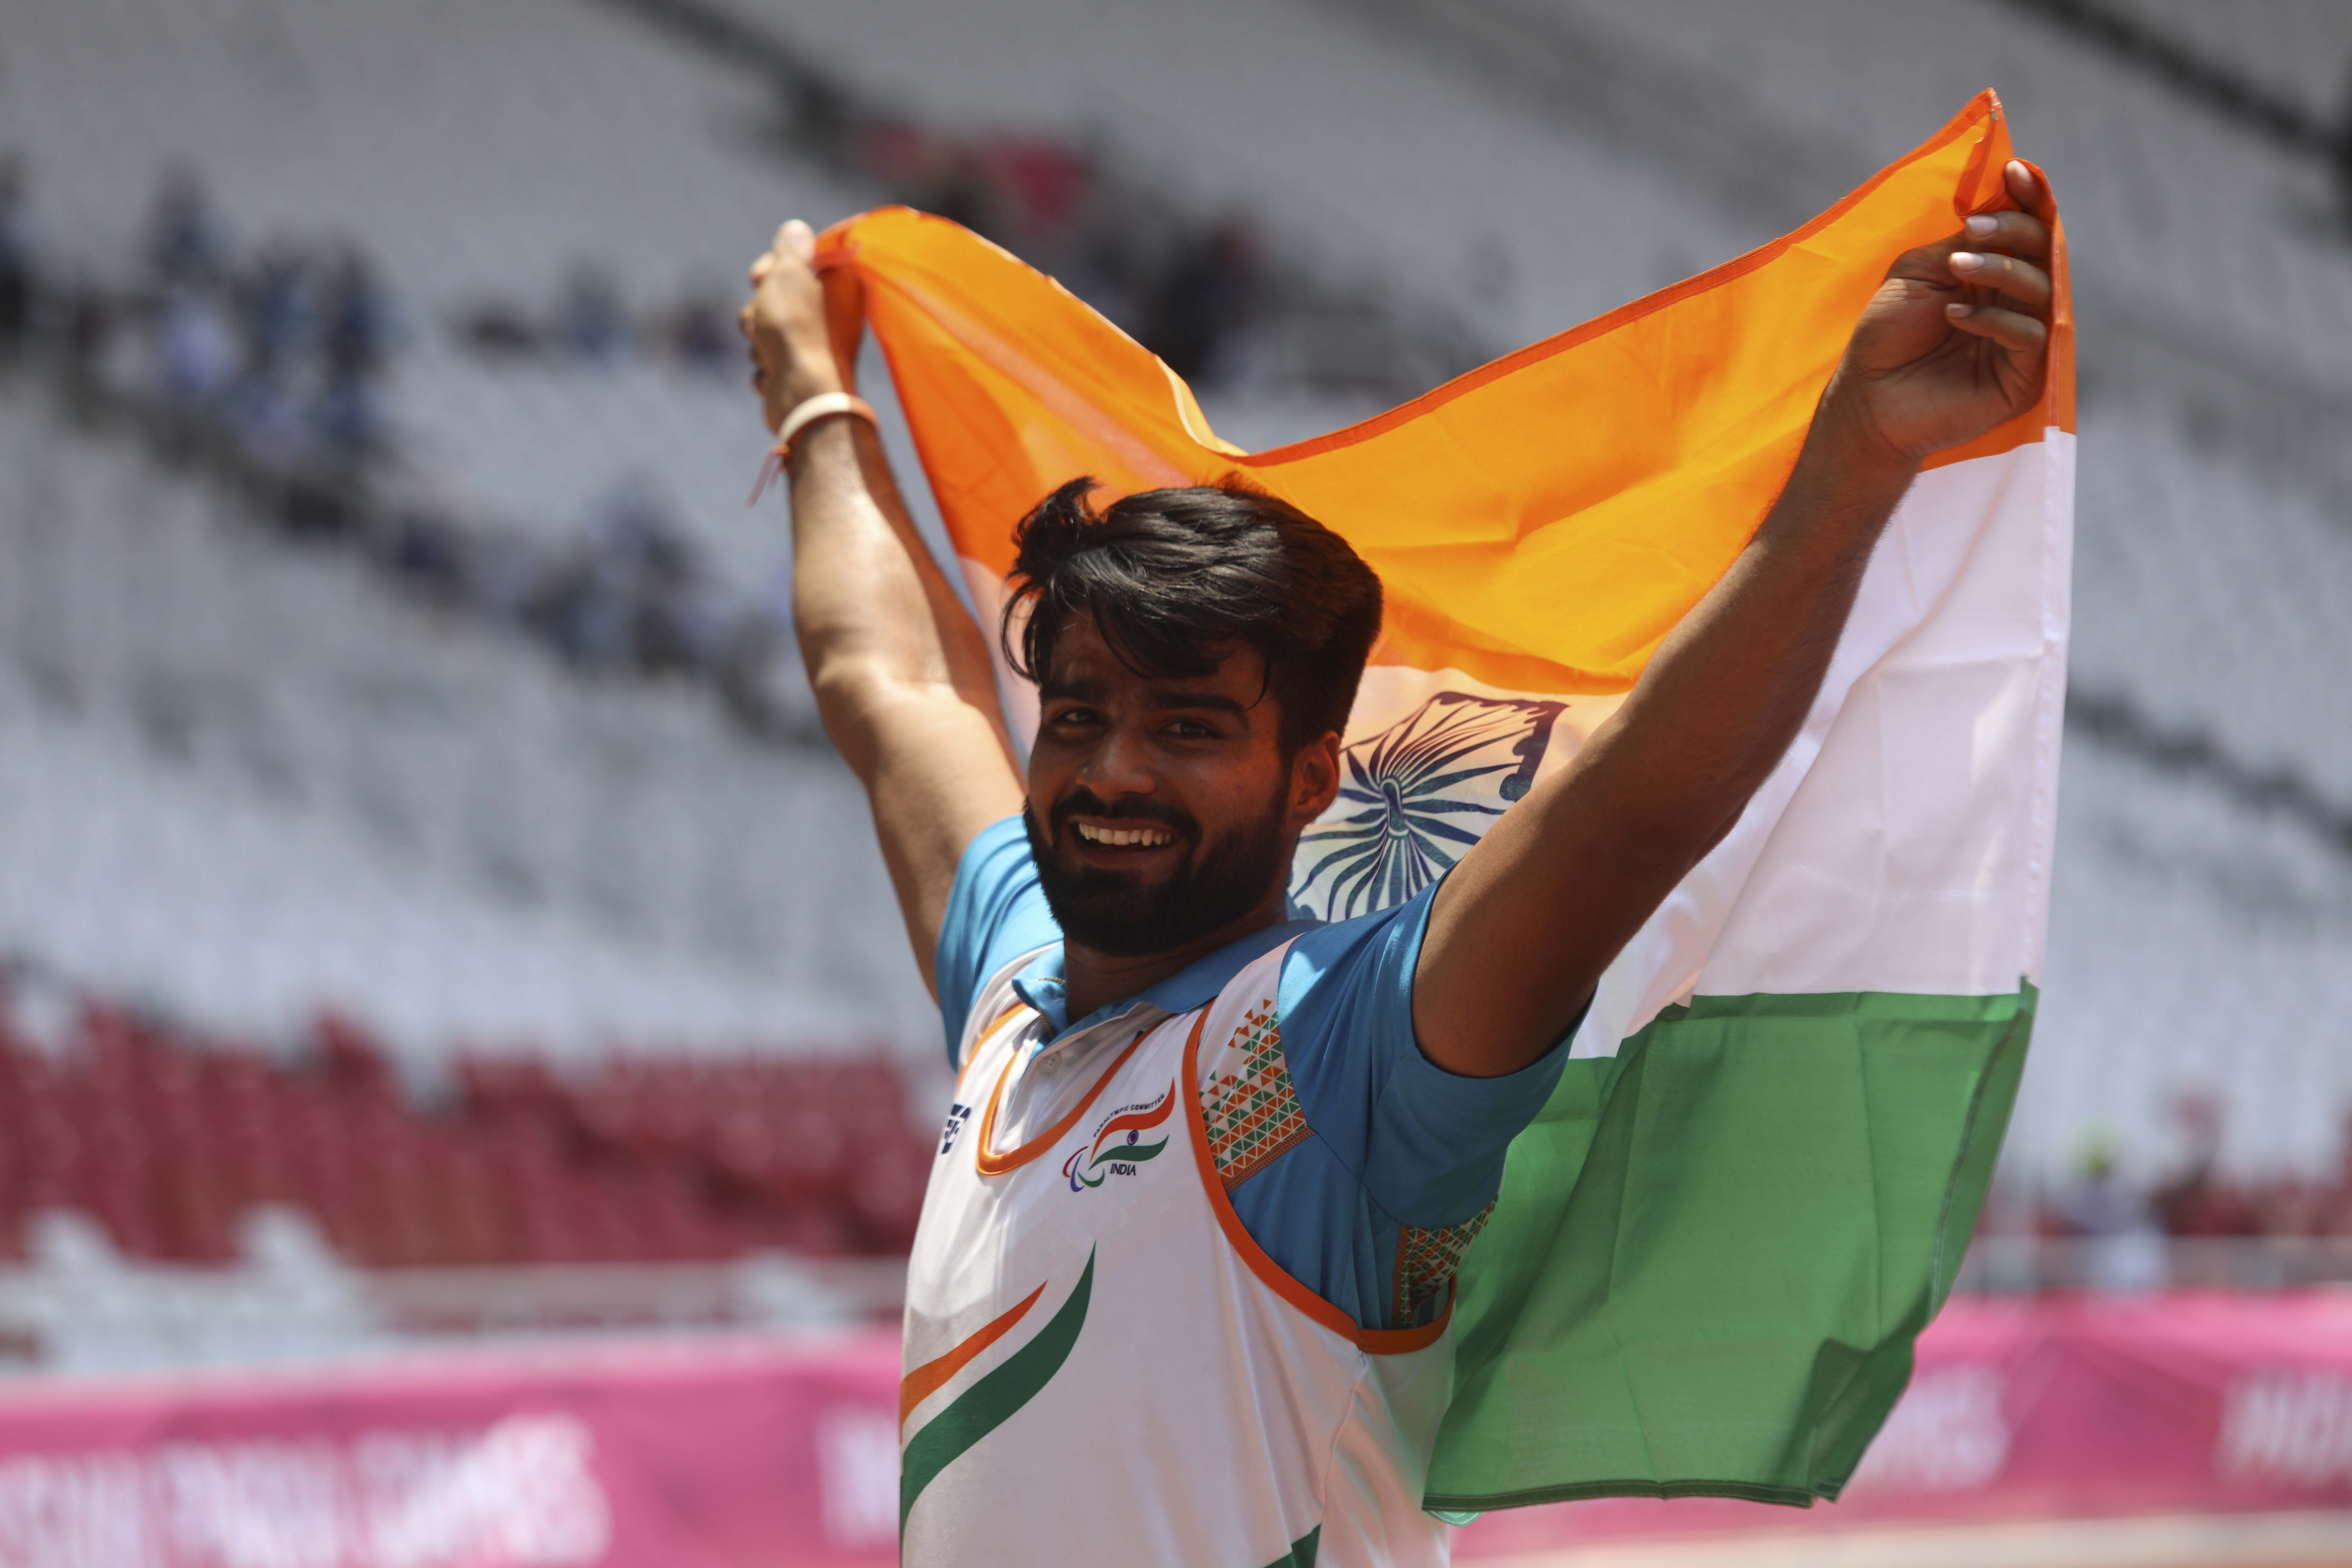 male Para athlete Sandeep Sandeep smiling and holding up an India flag